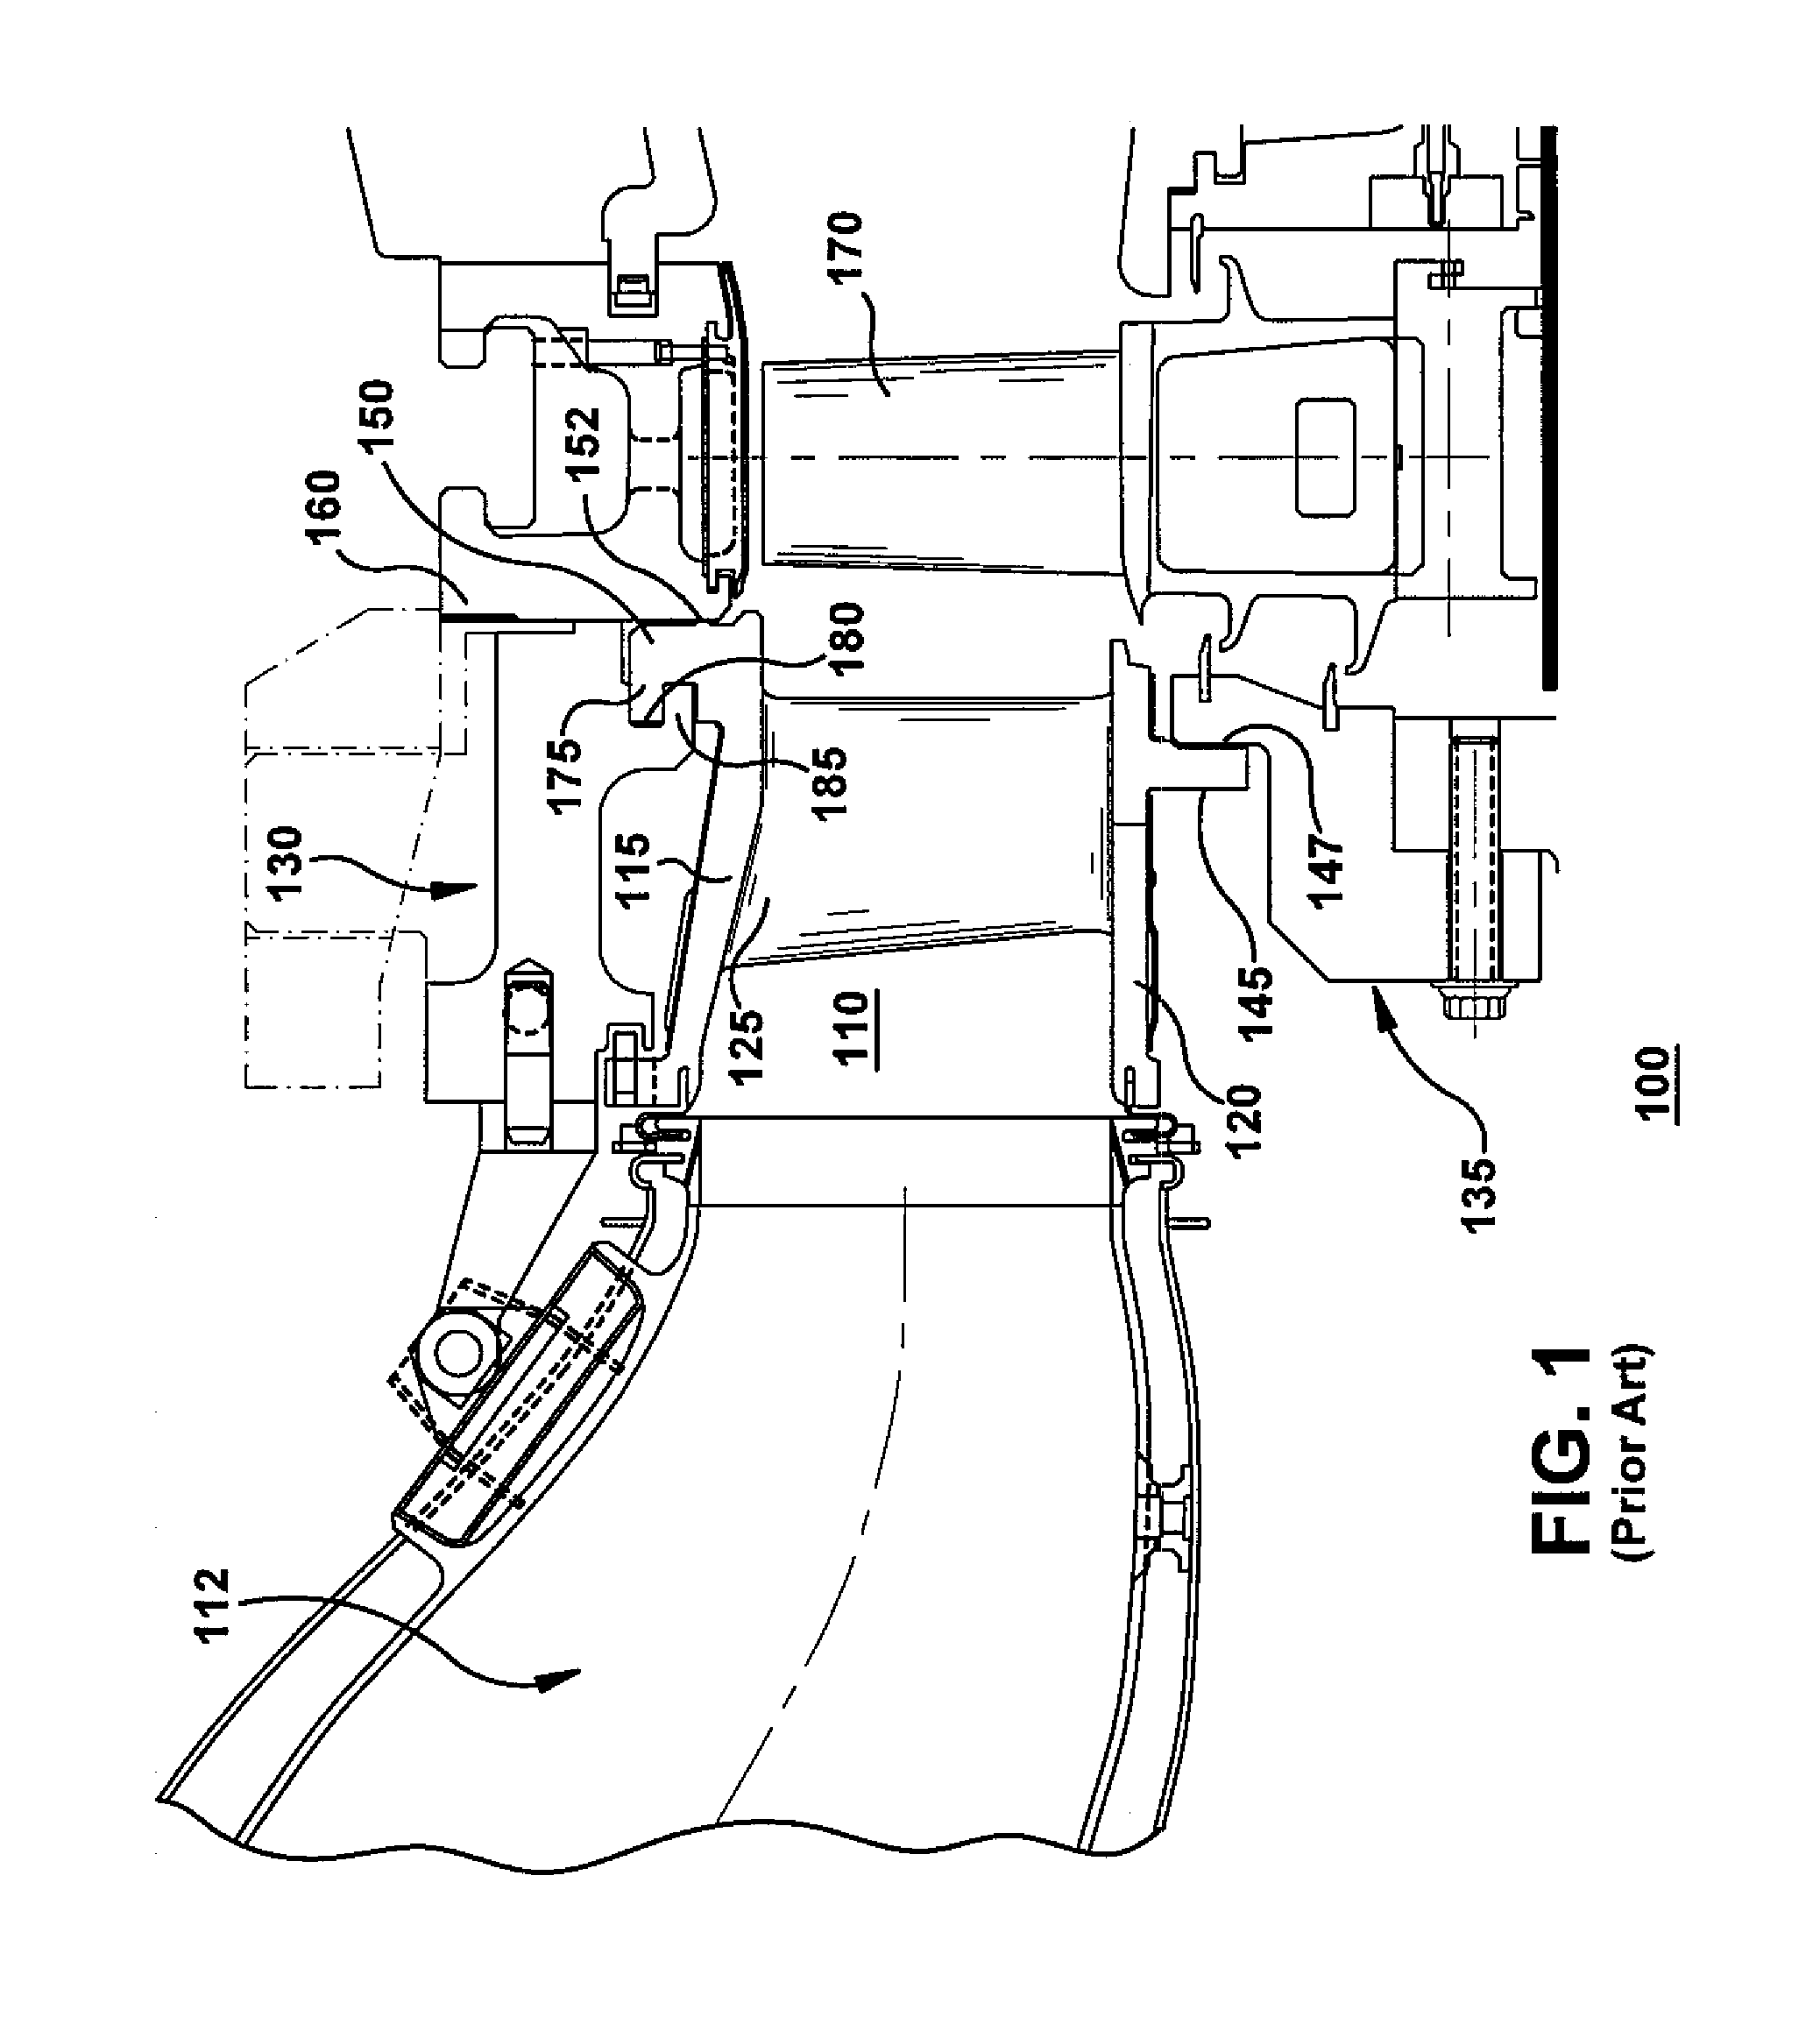 Fully contained retention pin for a turbine nozzle